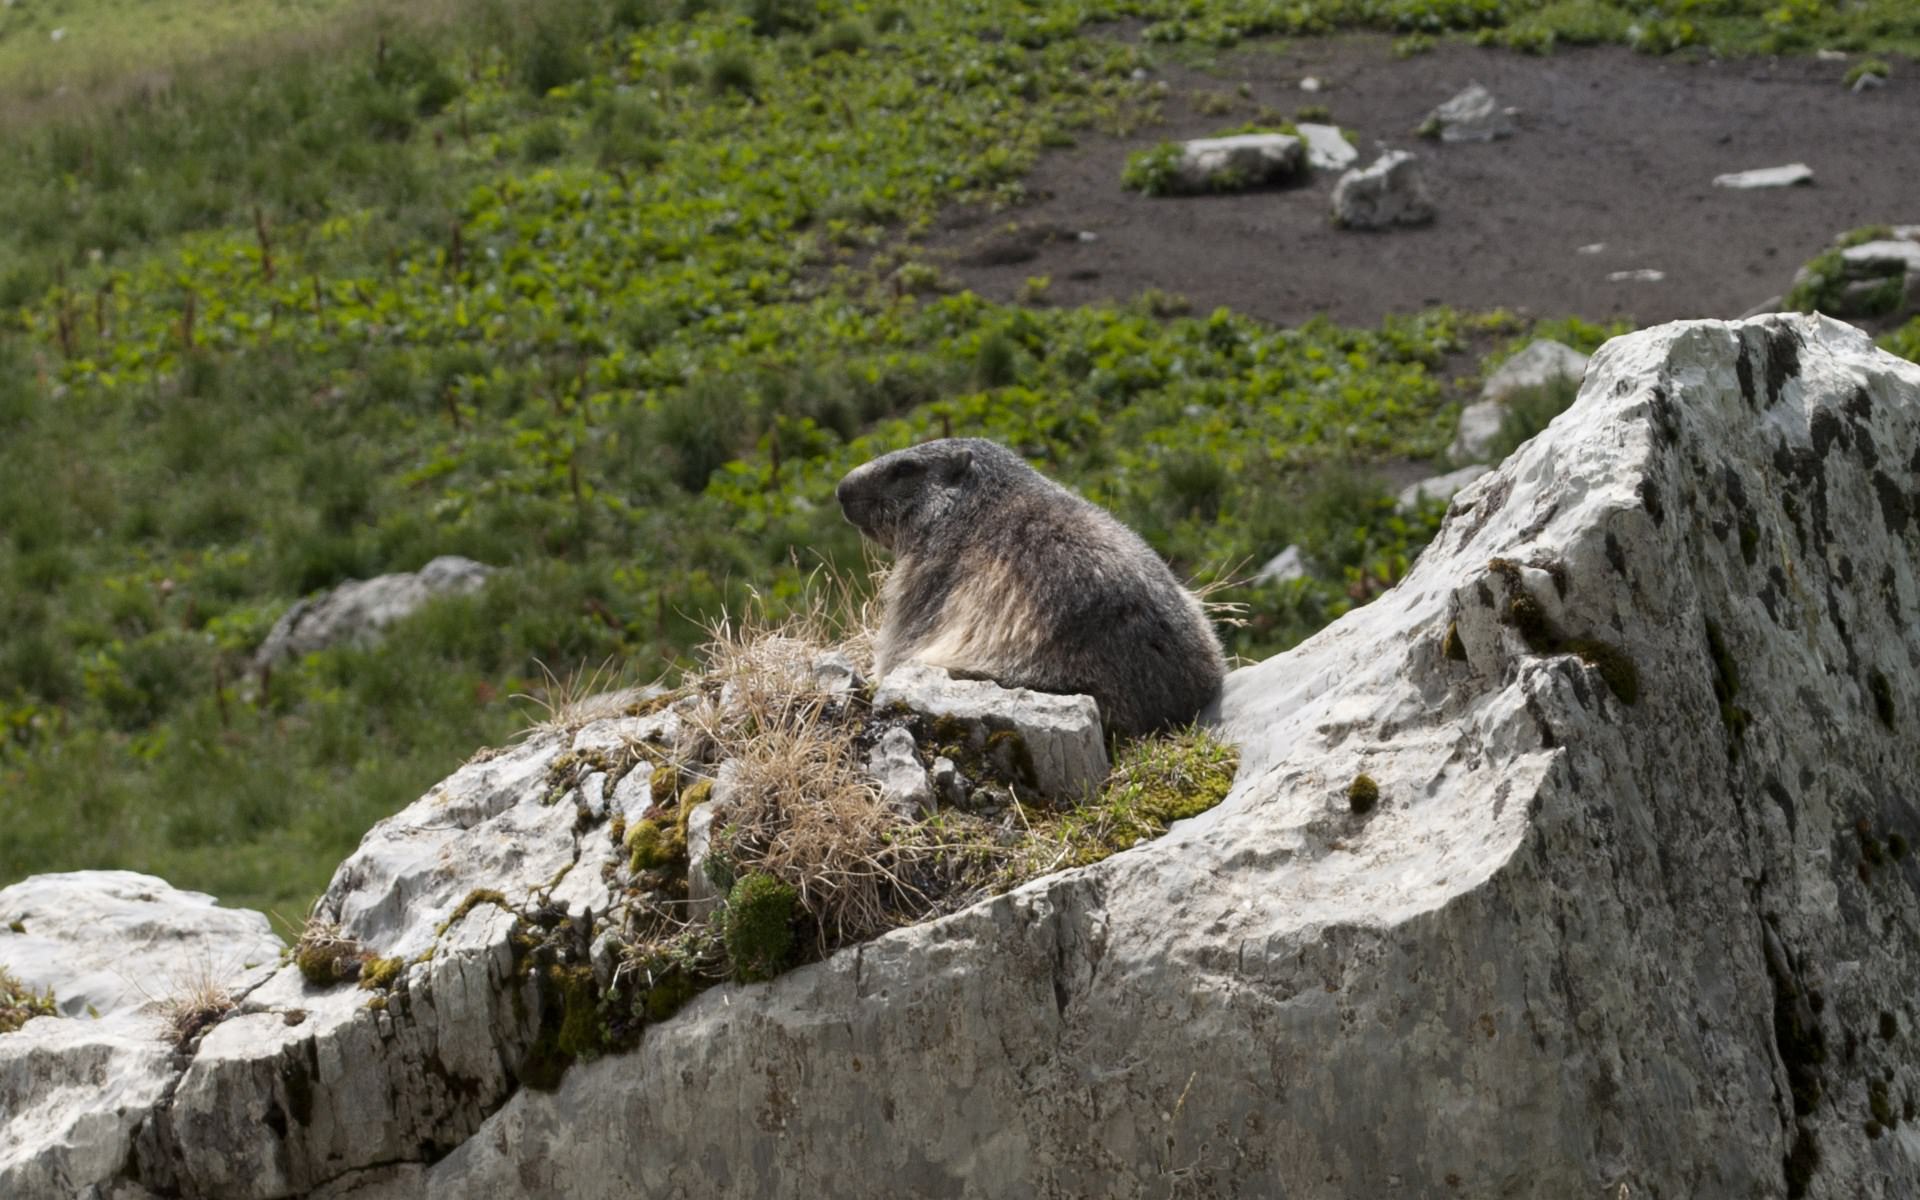 Marmottes Marmotte in the wild